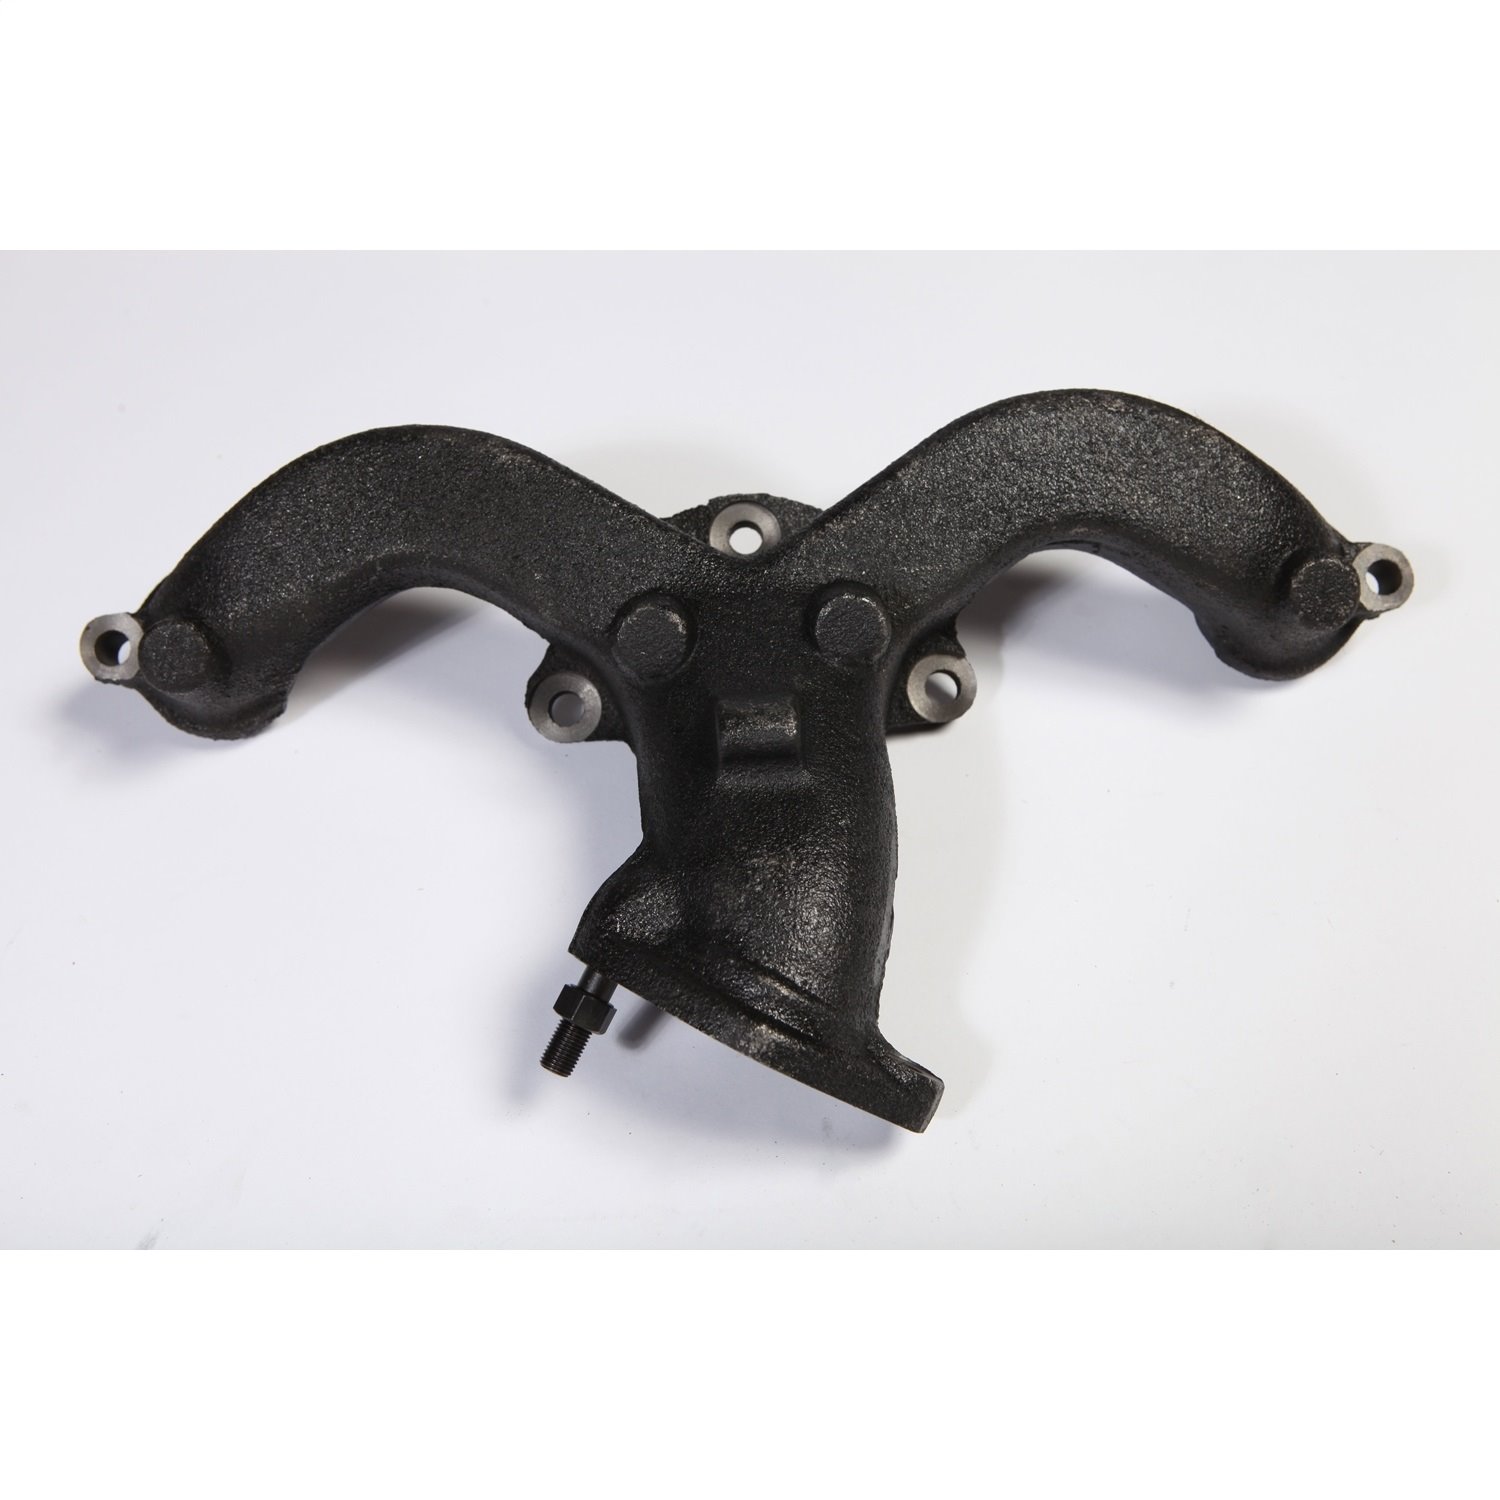 This exhaust manifold from Omix-ADA fits 52-71 Willys and Jeep models with a 134 cubic inch F-head engine.